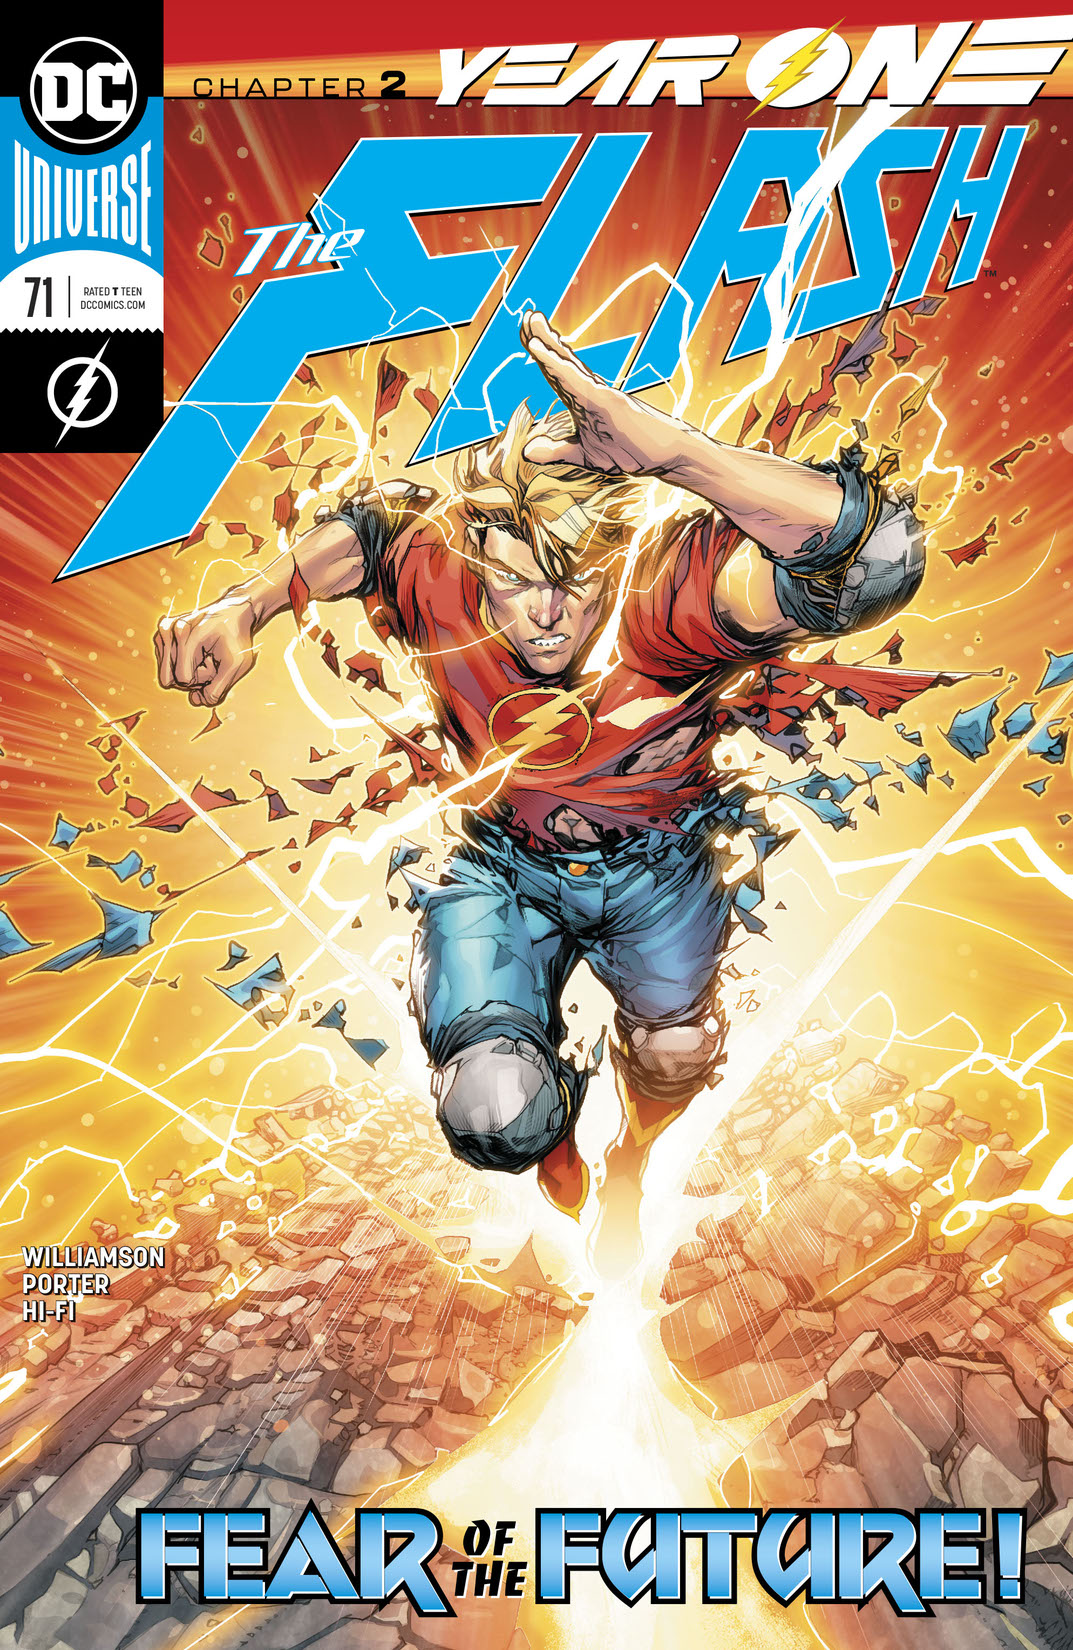 The Flash (2016-) #71 preview images